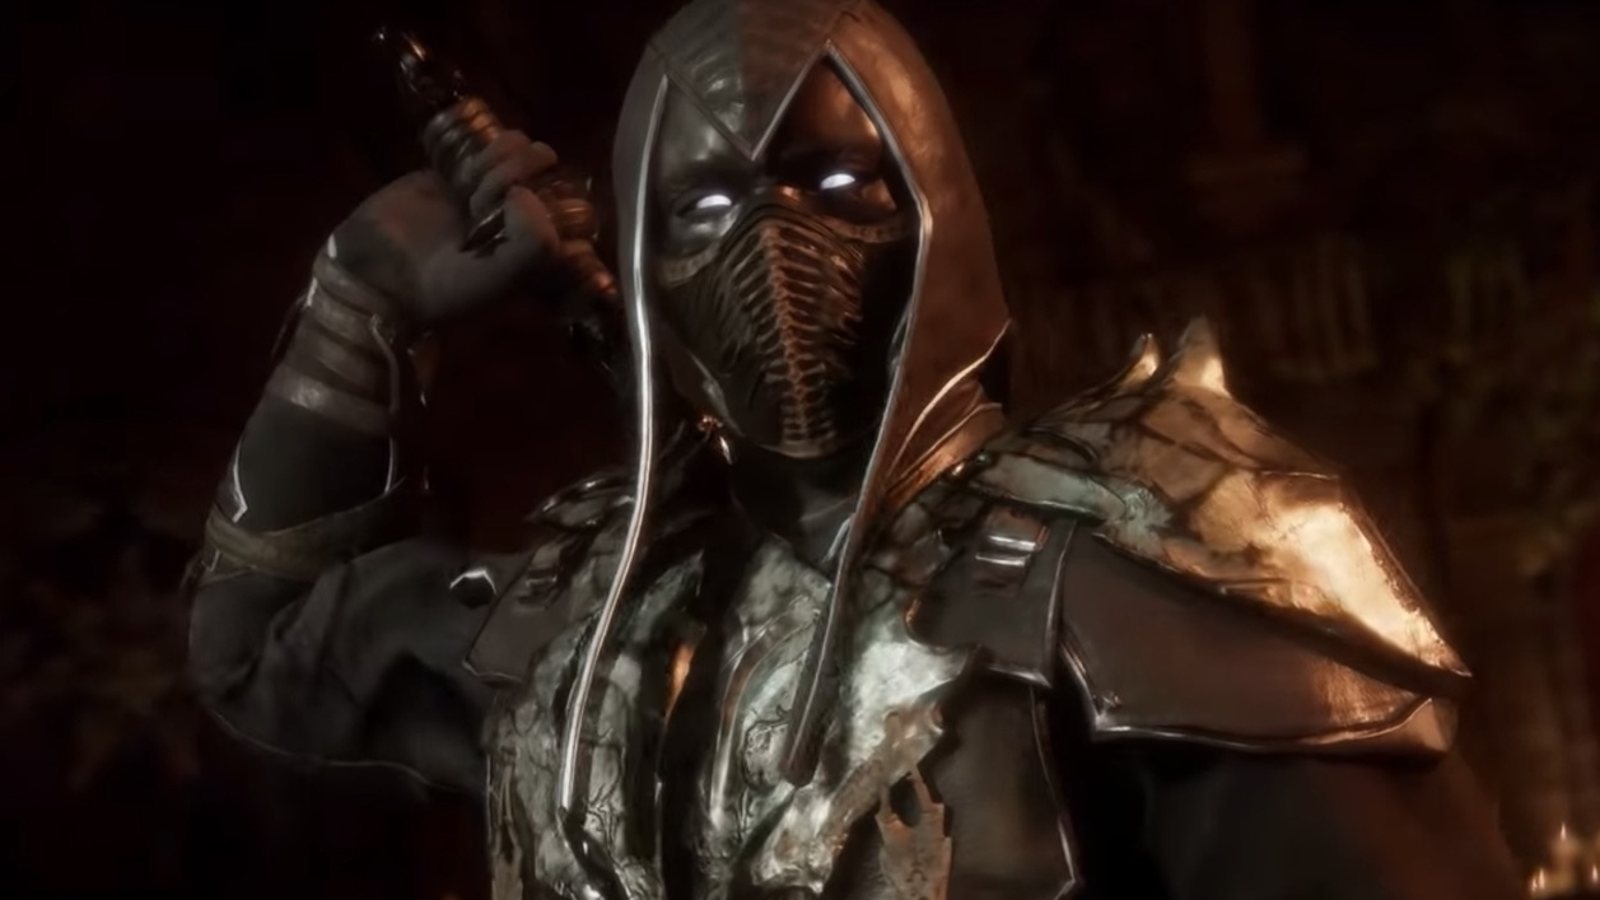 Will Noob Saibot Be In Mortal Kombat? The Sub-Zero Actor Has Thoughts